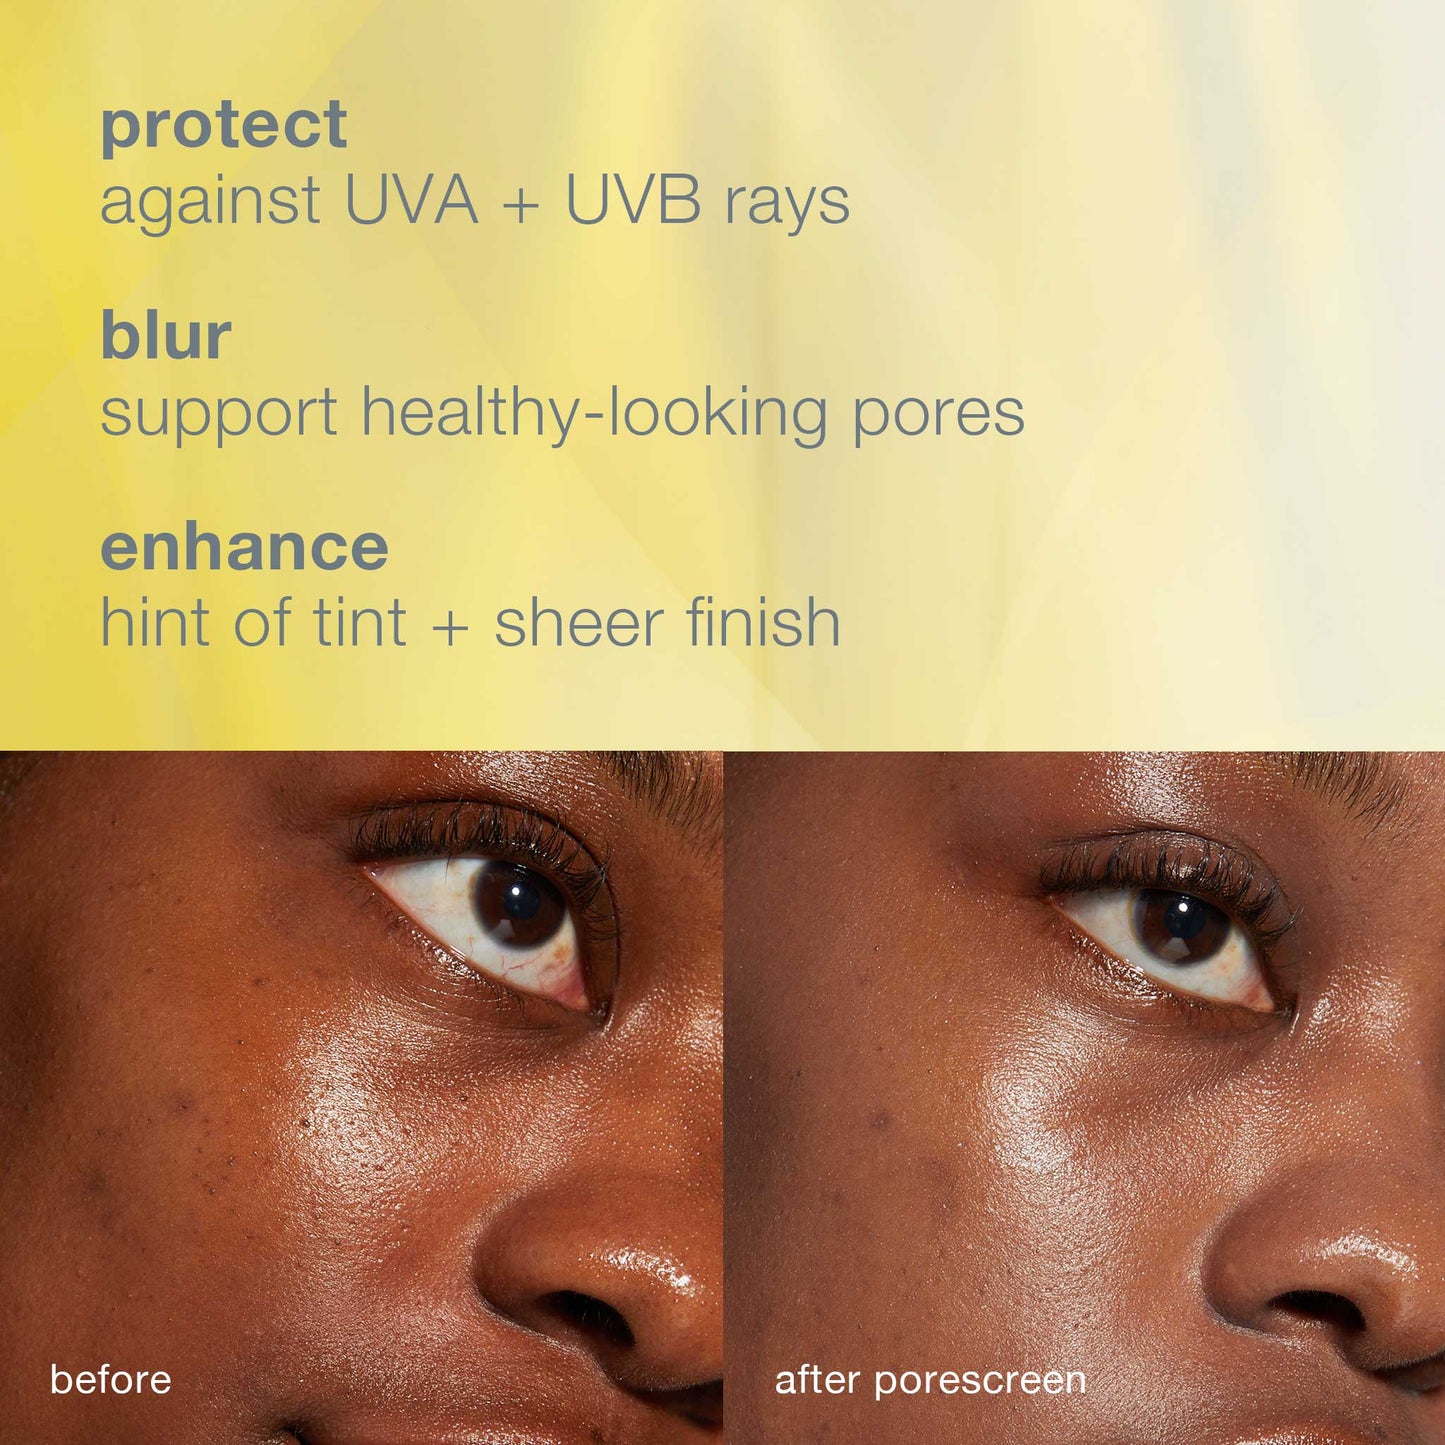 porescreen spf40 benefits and before and after